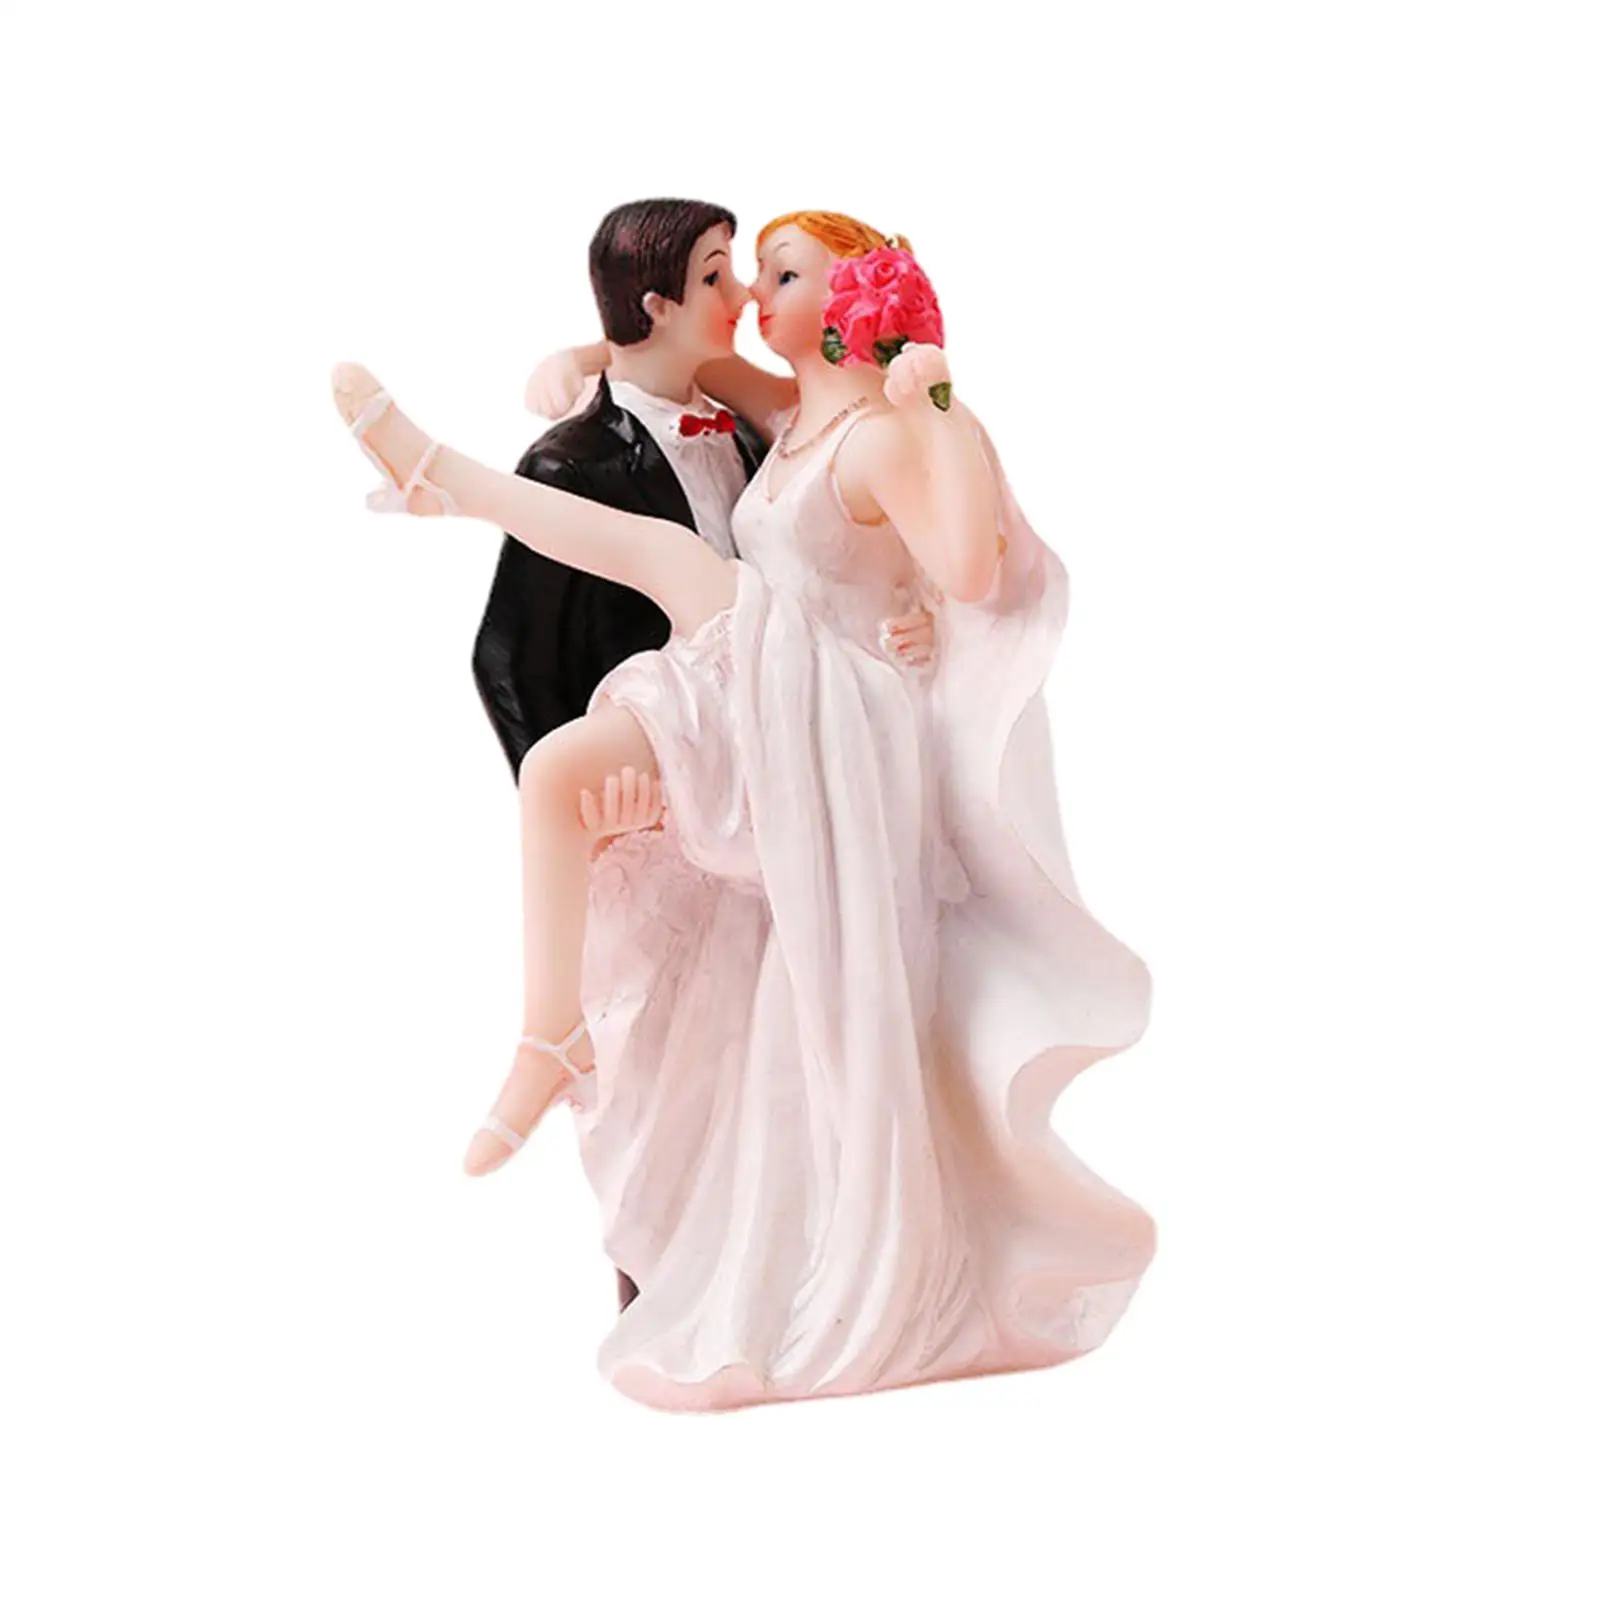 Wedding Cake Topper Desk Decoration Resin Figurines Couple Figures for Engagement Bride Shower Valentines Day Party Gift